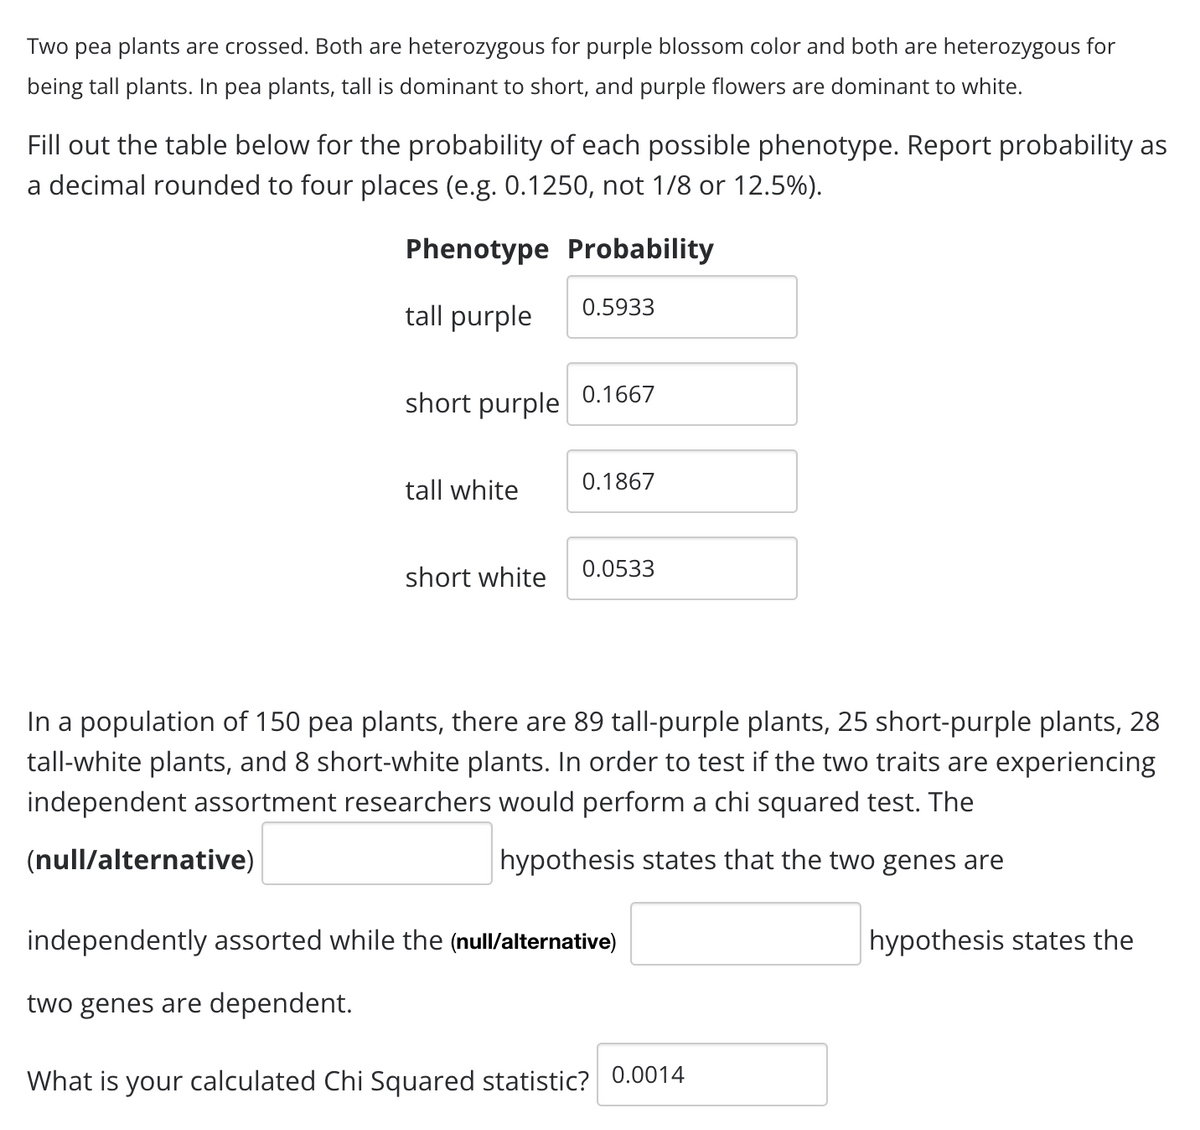 Two pea plants are crossed. Both are heterozygous for purple blossom color and both are heterozygous for
being tall plants. In pea plants, tall is dominant to short, and purple flowers are dominant to white.
Fill out the table below for the probability of each possible phenotype. Report probability as
a decimal rounded to four places (e.g. 0.1250, not 1/8 or 12.5%).
Phenotype Probability
0.5933
tall purple
0.1667
short purple
0.1867
tall white
0.0533
short white
In a population of 150 pea plants, there are 89 tall-purple plants, 25 short-purple plants, 28
tall-white plants, and 8 short-white plants. In order to test if the two traits are experiencing
independent assortment researchers would perform a chi squared test. The
(null/alternative)
hypothesis states that the two genes are
independently assorted while the (null/alternative)
hypothesis states the
two genes are dependent.
What is your calculated Chi Squared statistic? 0.0014
